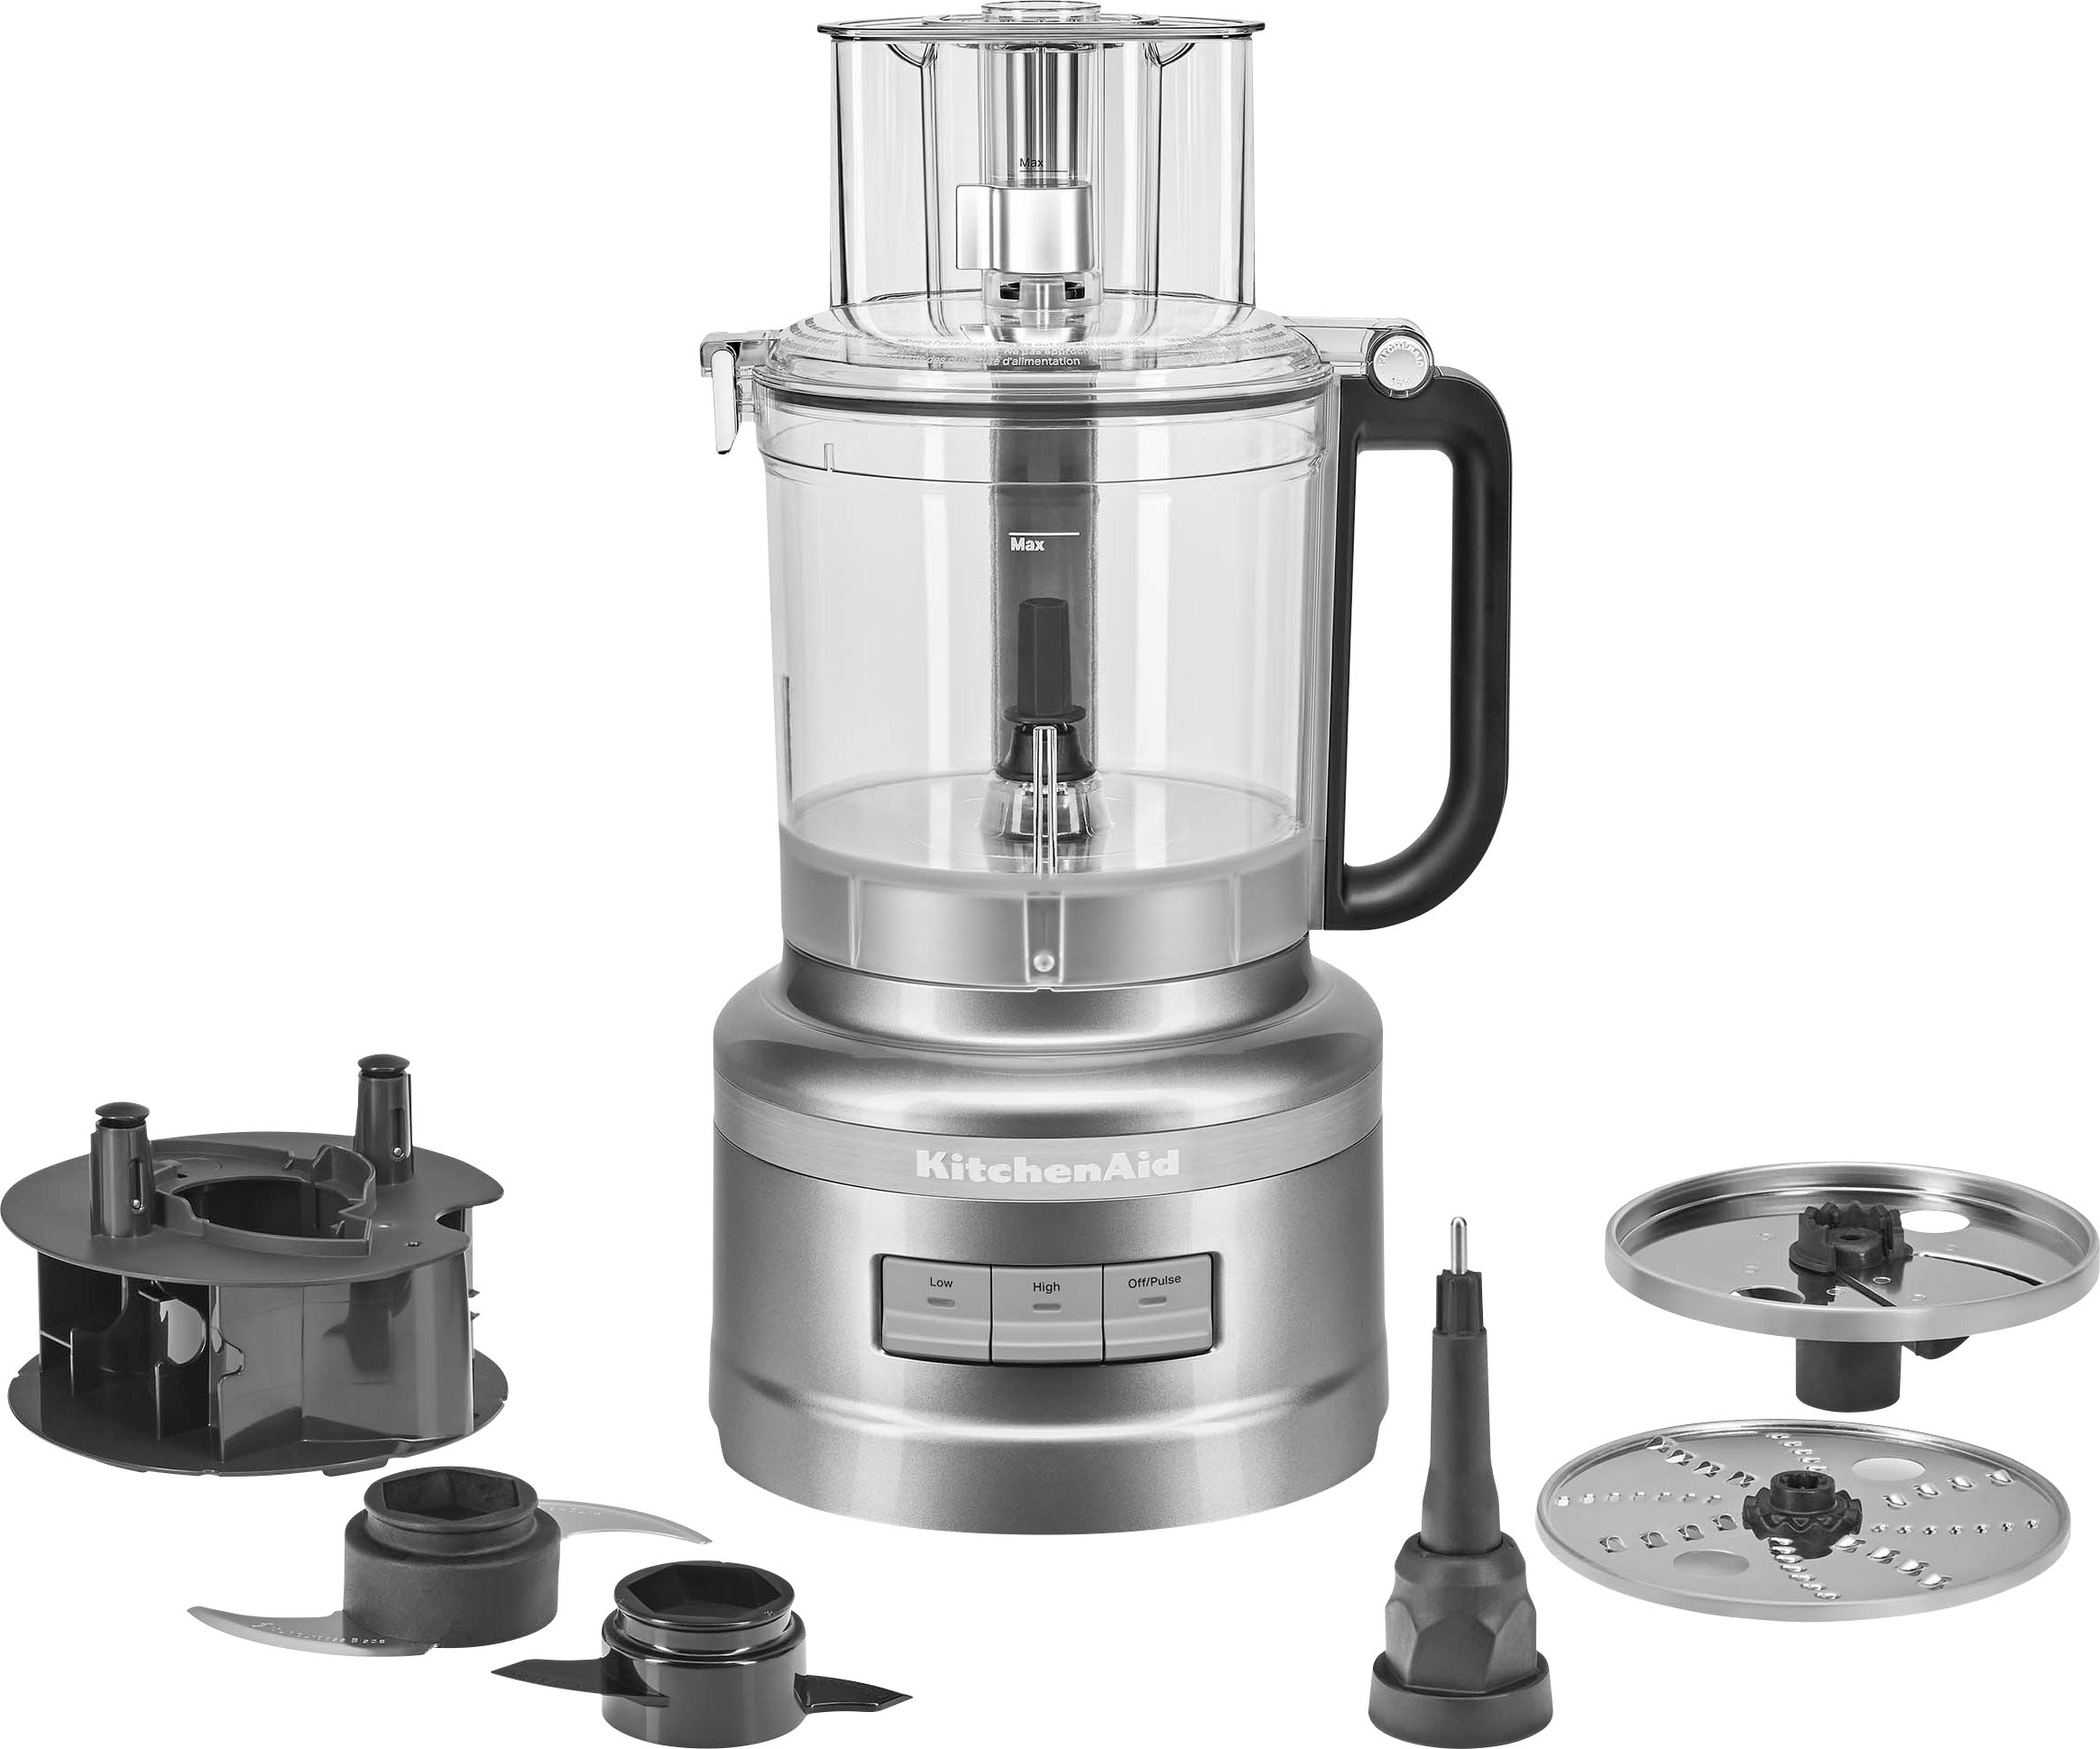 KitchenAid Food Processor French Fry Disc for sale online